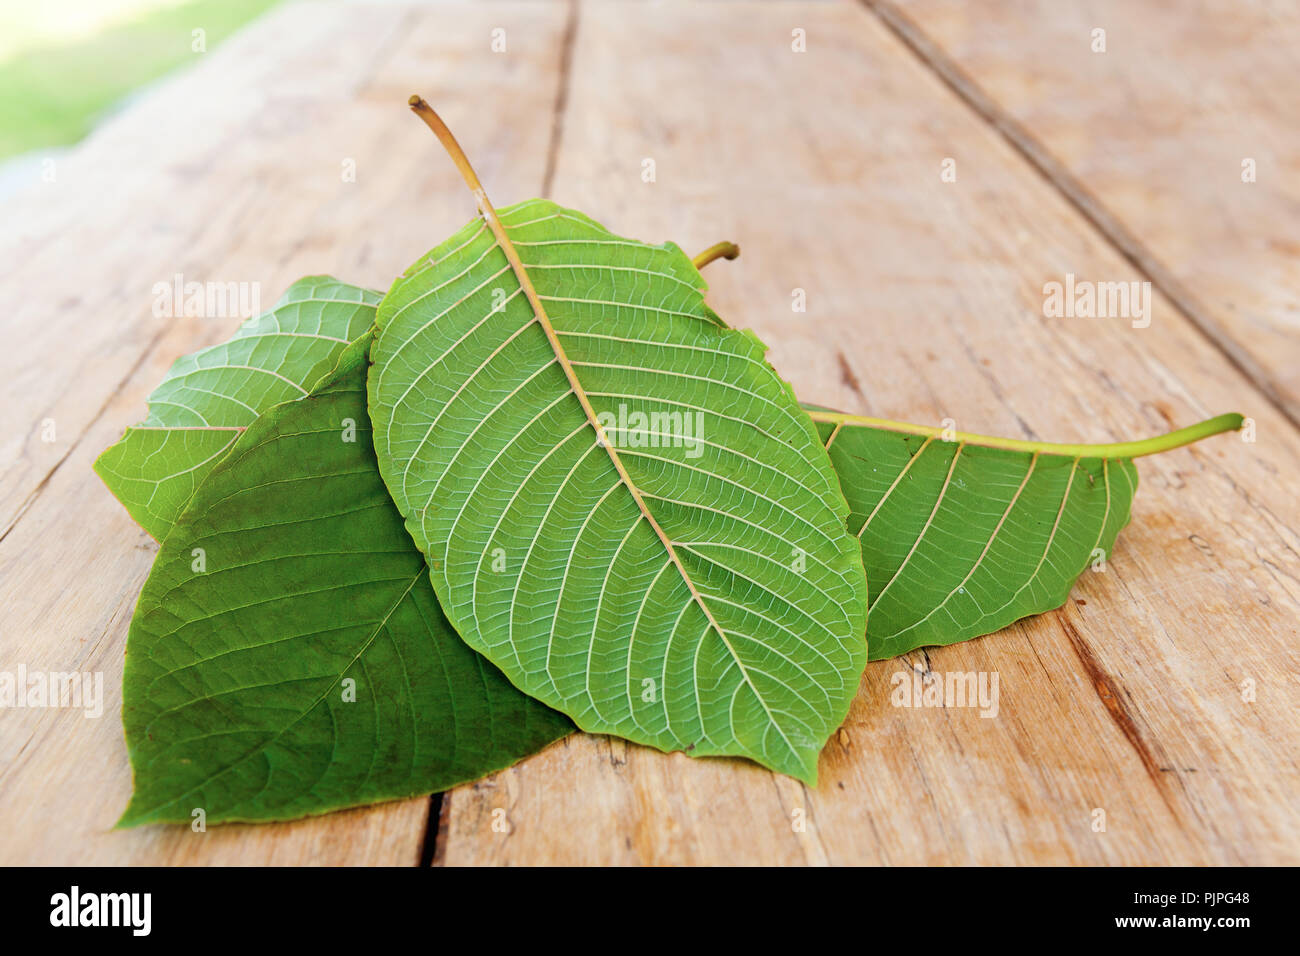 Mitragyna speciosa leaves on wooden table. Natural medicinal plant. Stock Photo